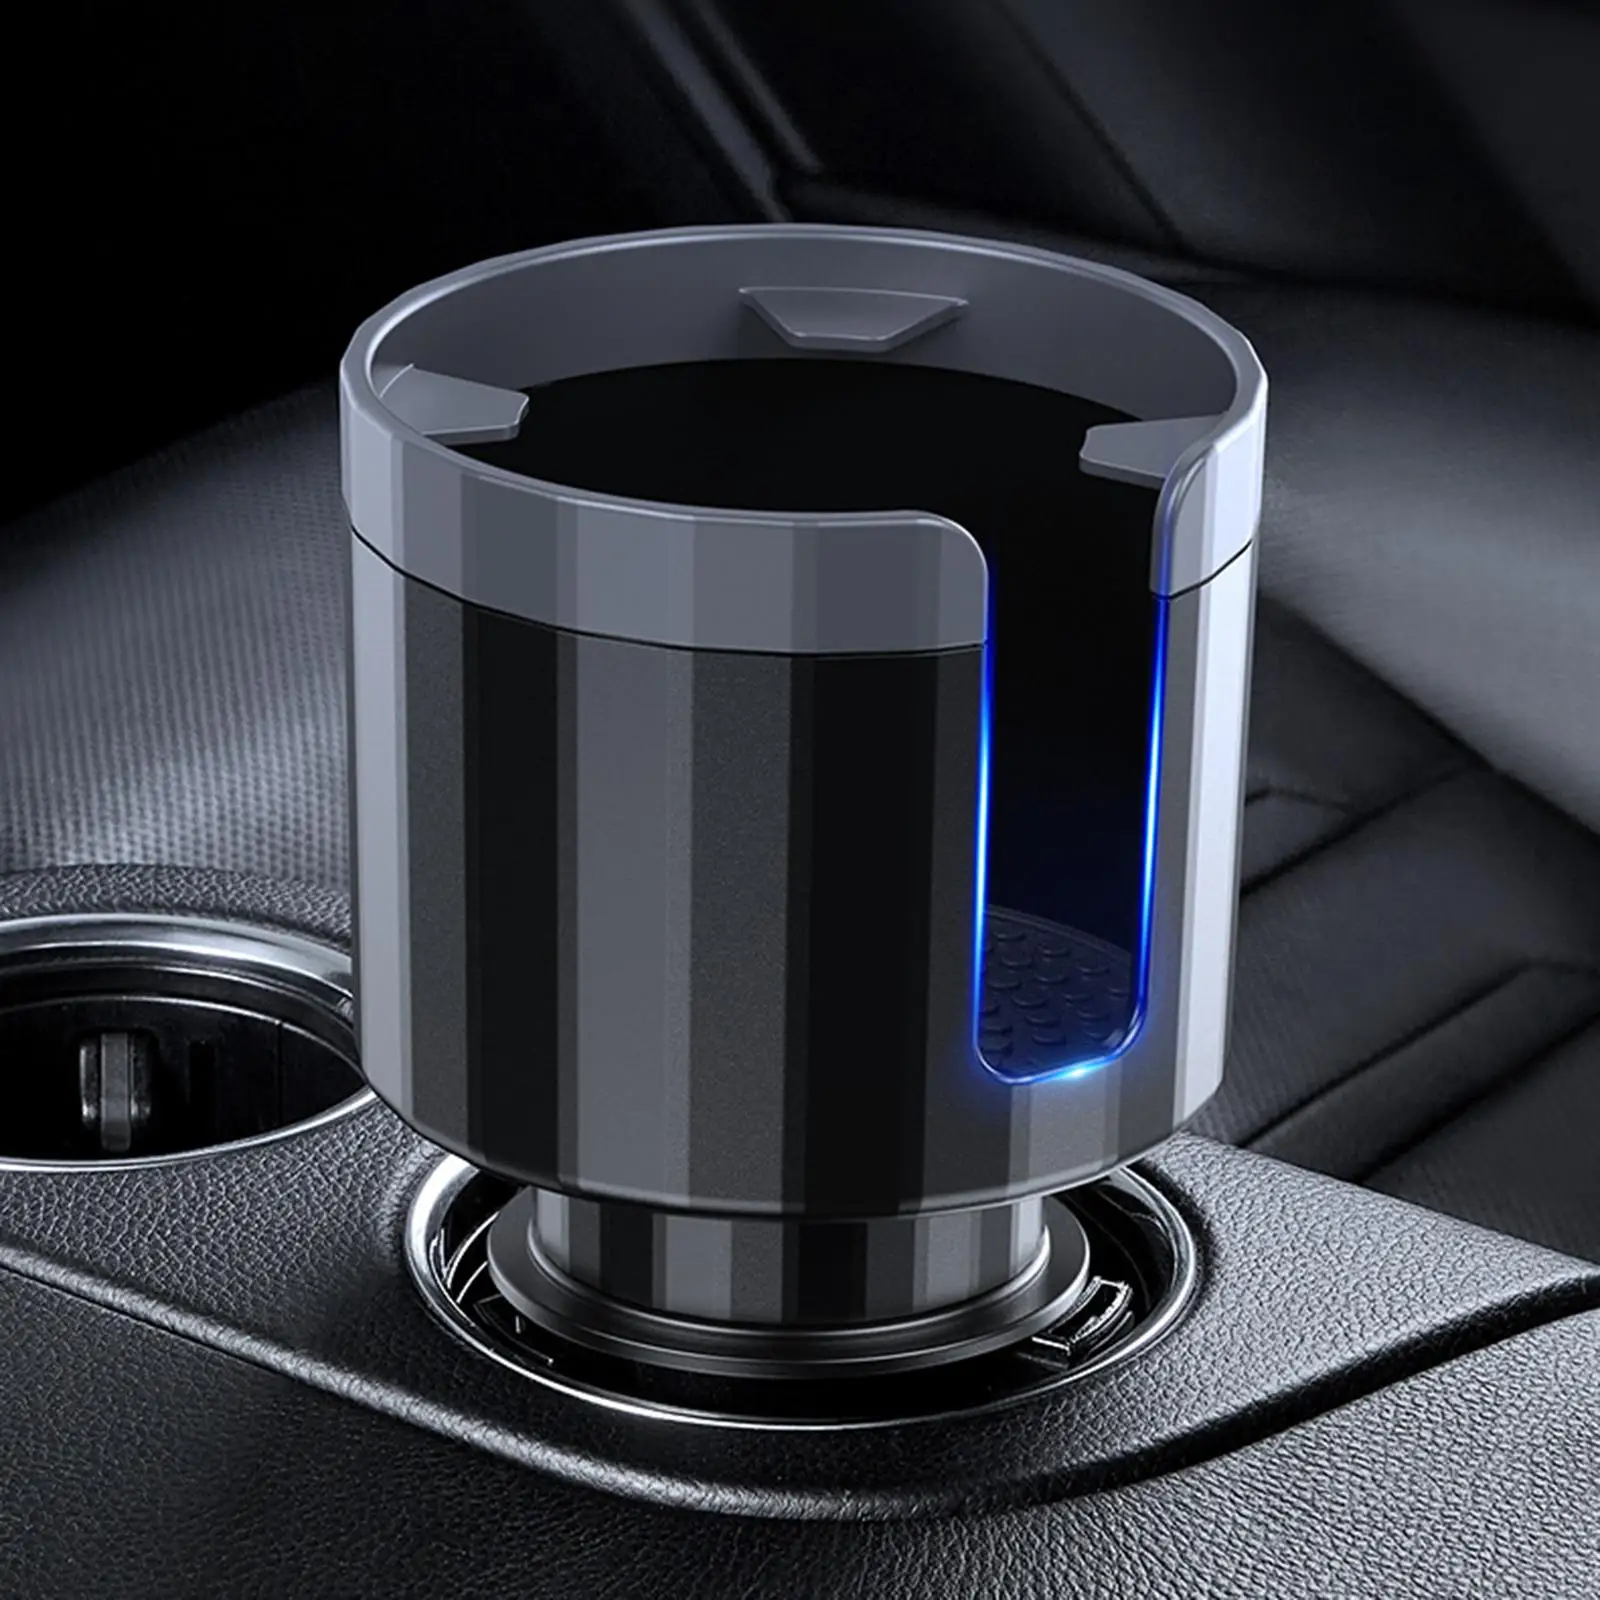 Car Cup Holder Expander Adapter Organizer for Most Cup Holder with Adjustable Base for Cups Accessories Easy to Install